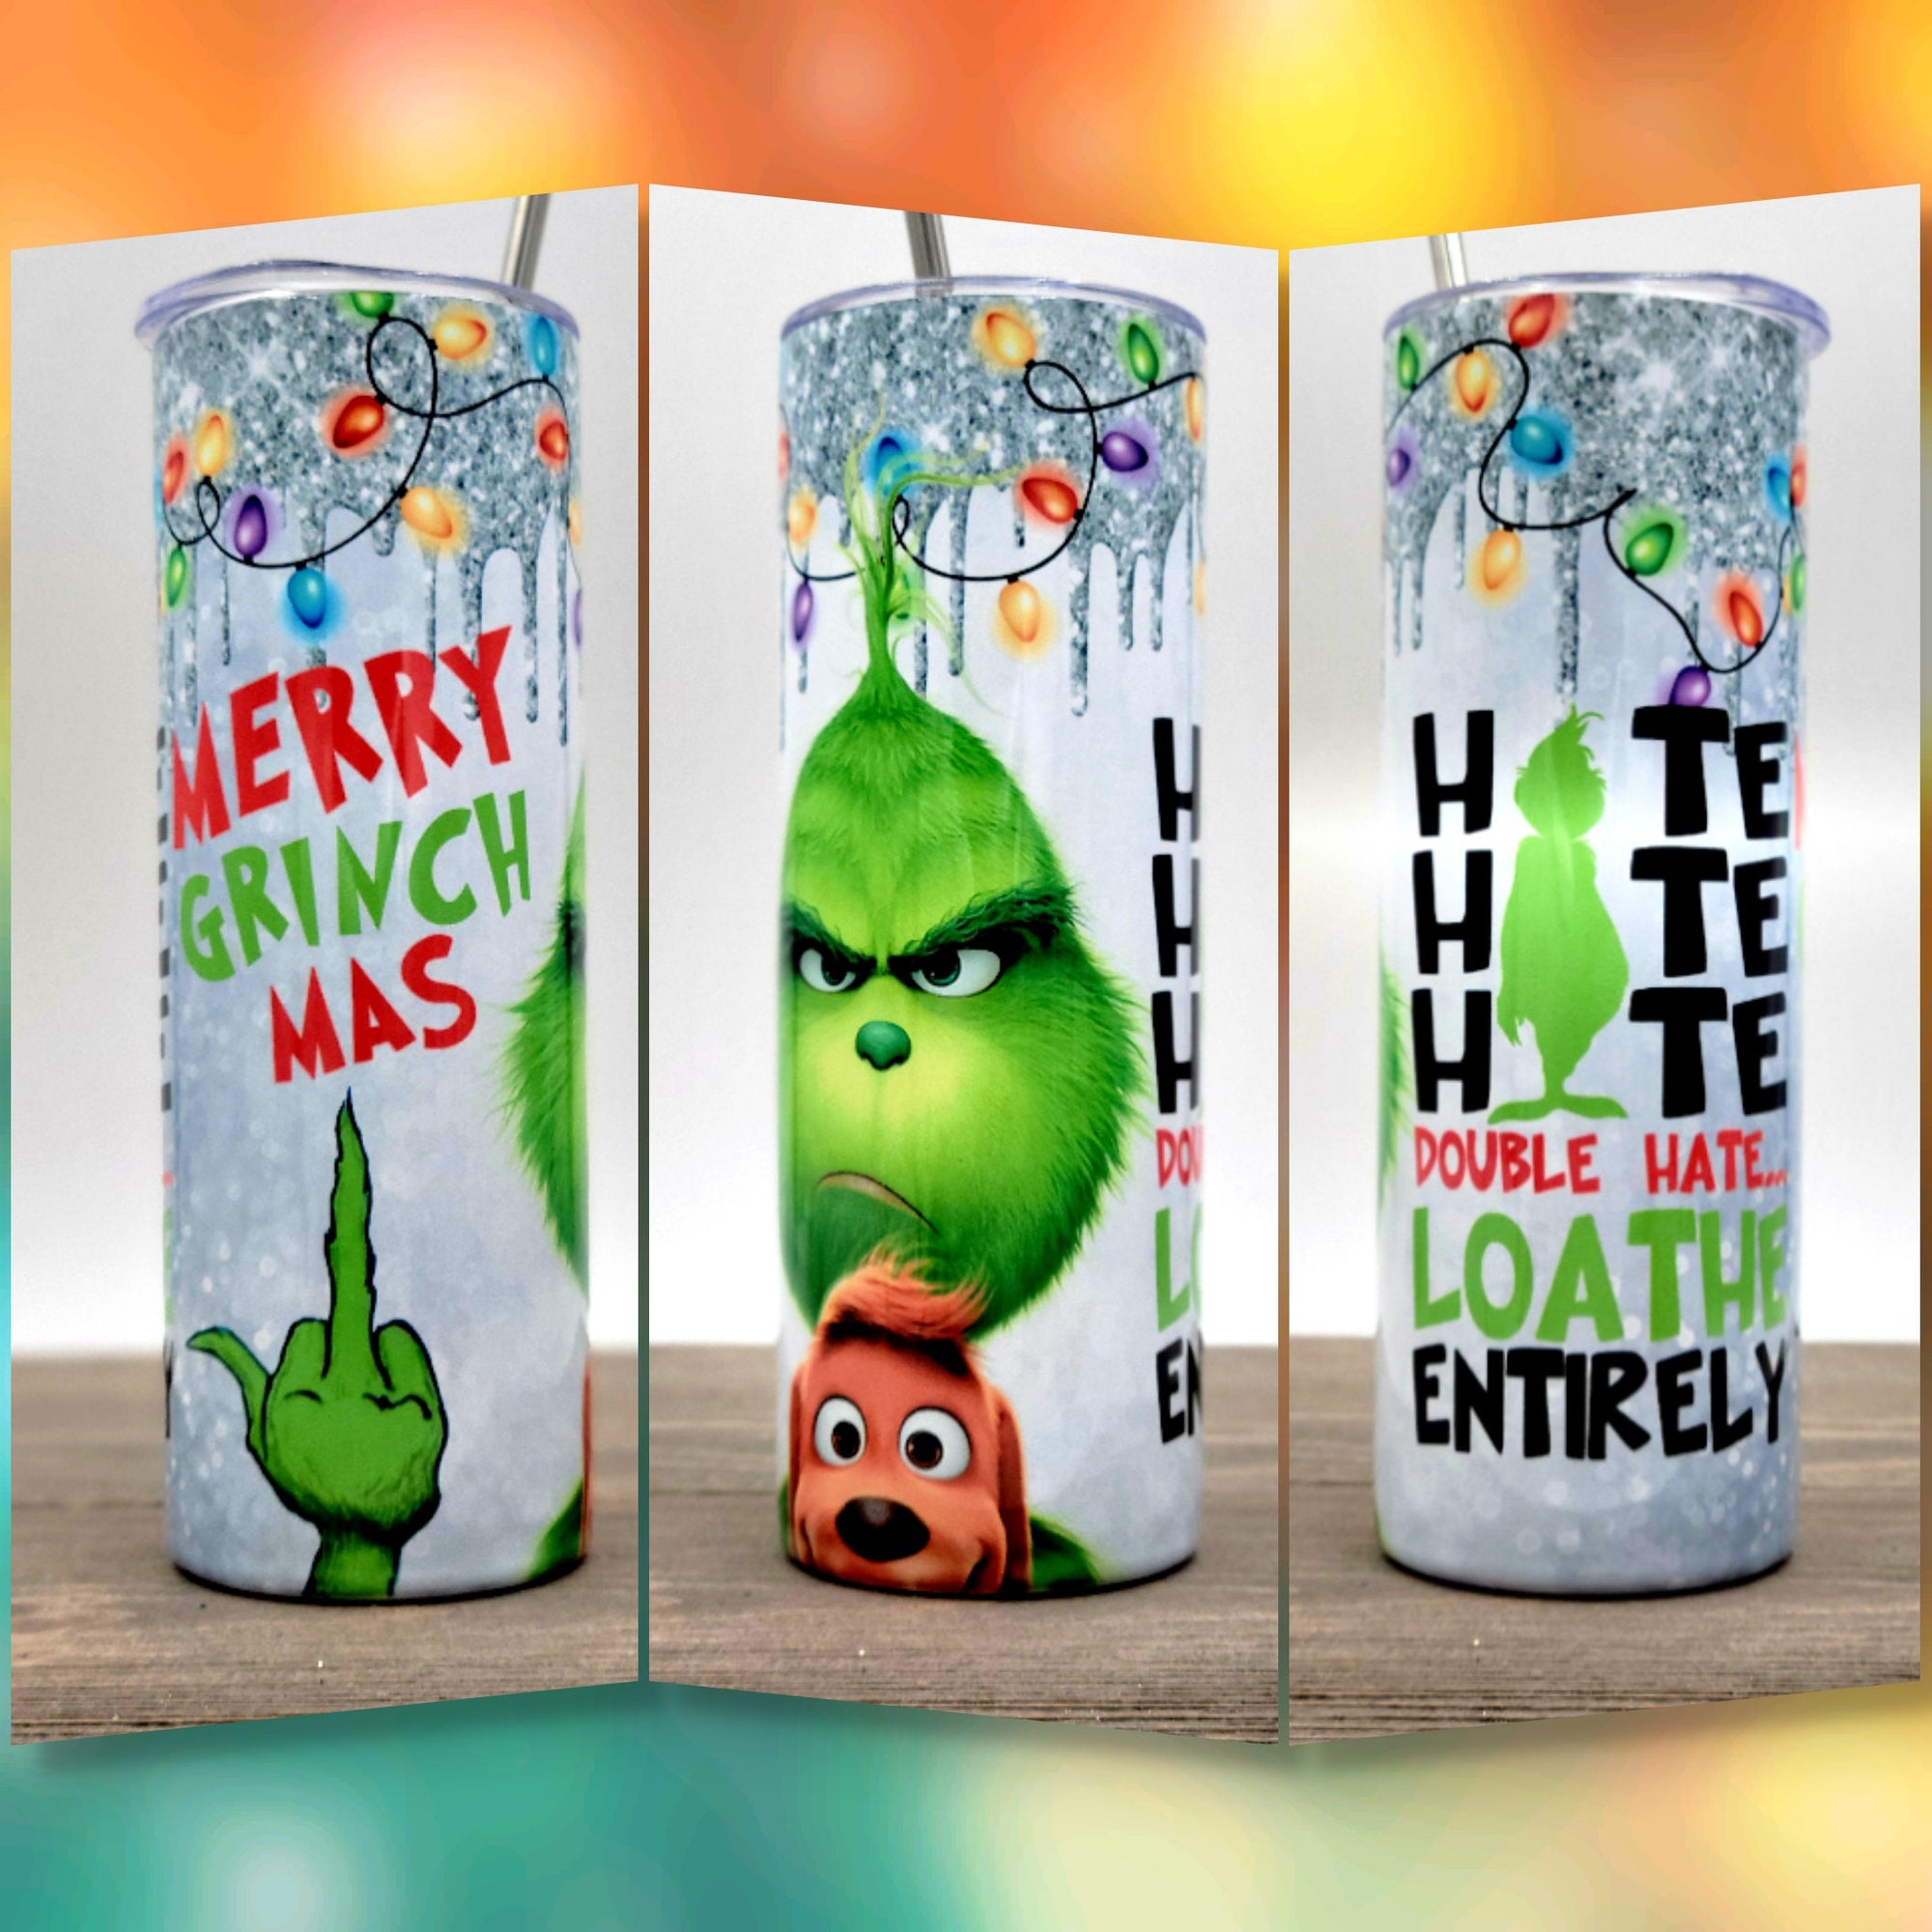 Hate Hate Hate | Merry Grinchmas Tumbler | Christmas Tumbler | Christmas Gifts under 25 | Christmas Gift | Gifts For Her | 20oz Tumbler